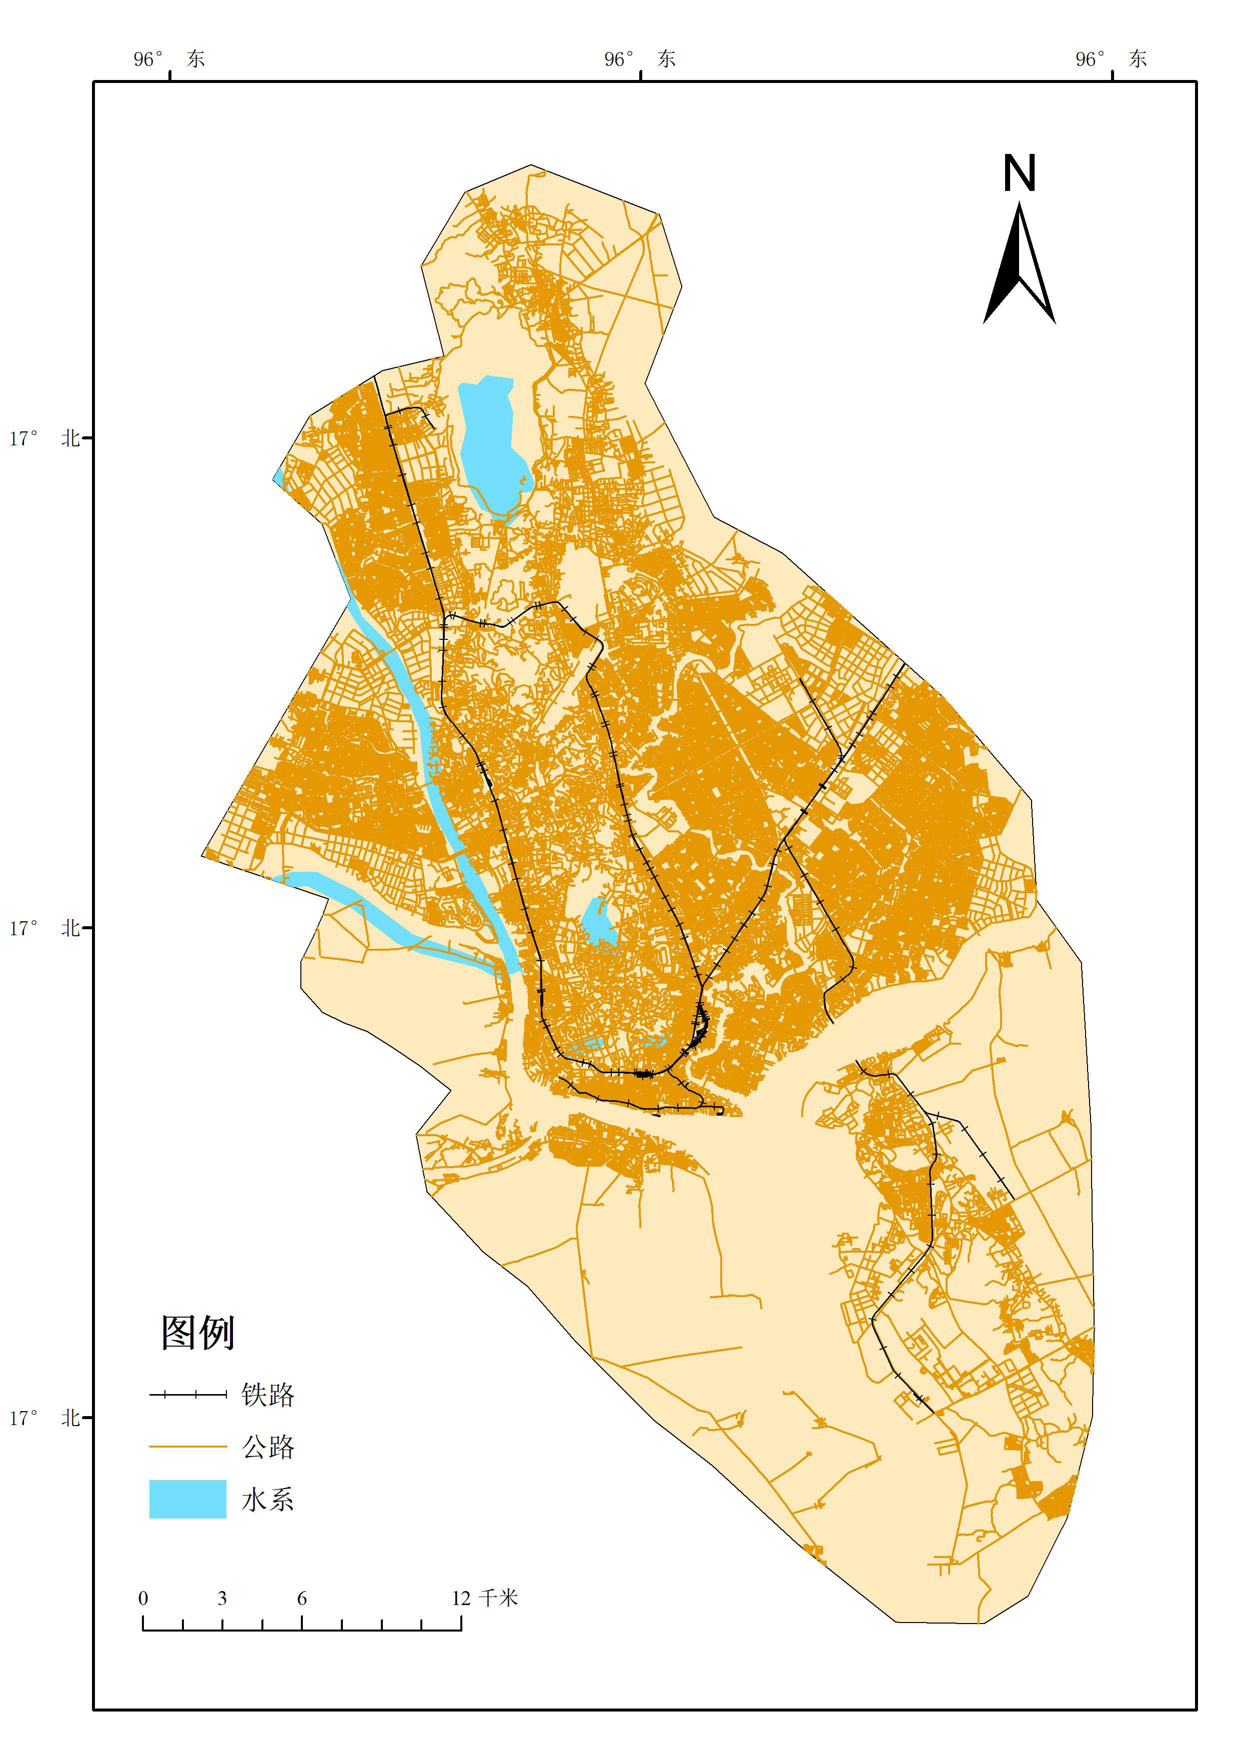 Spatial distribution data set of transportation, water system, farmland and built up area in Yangon deepwater port area (2019)